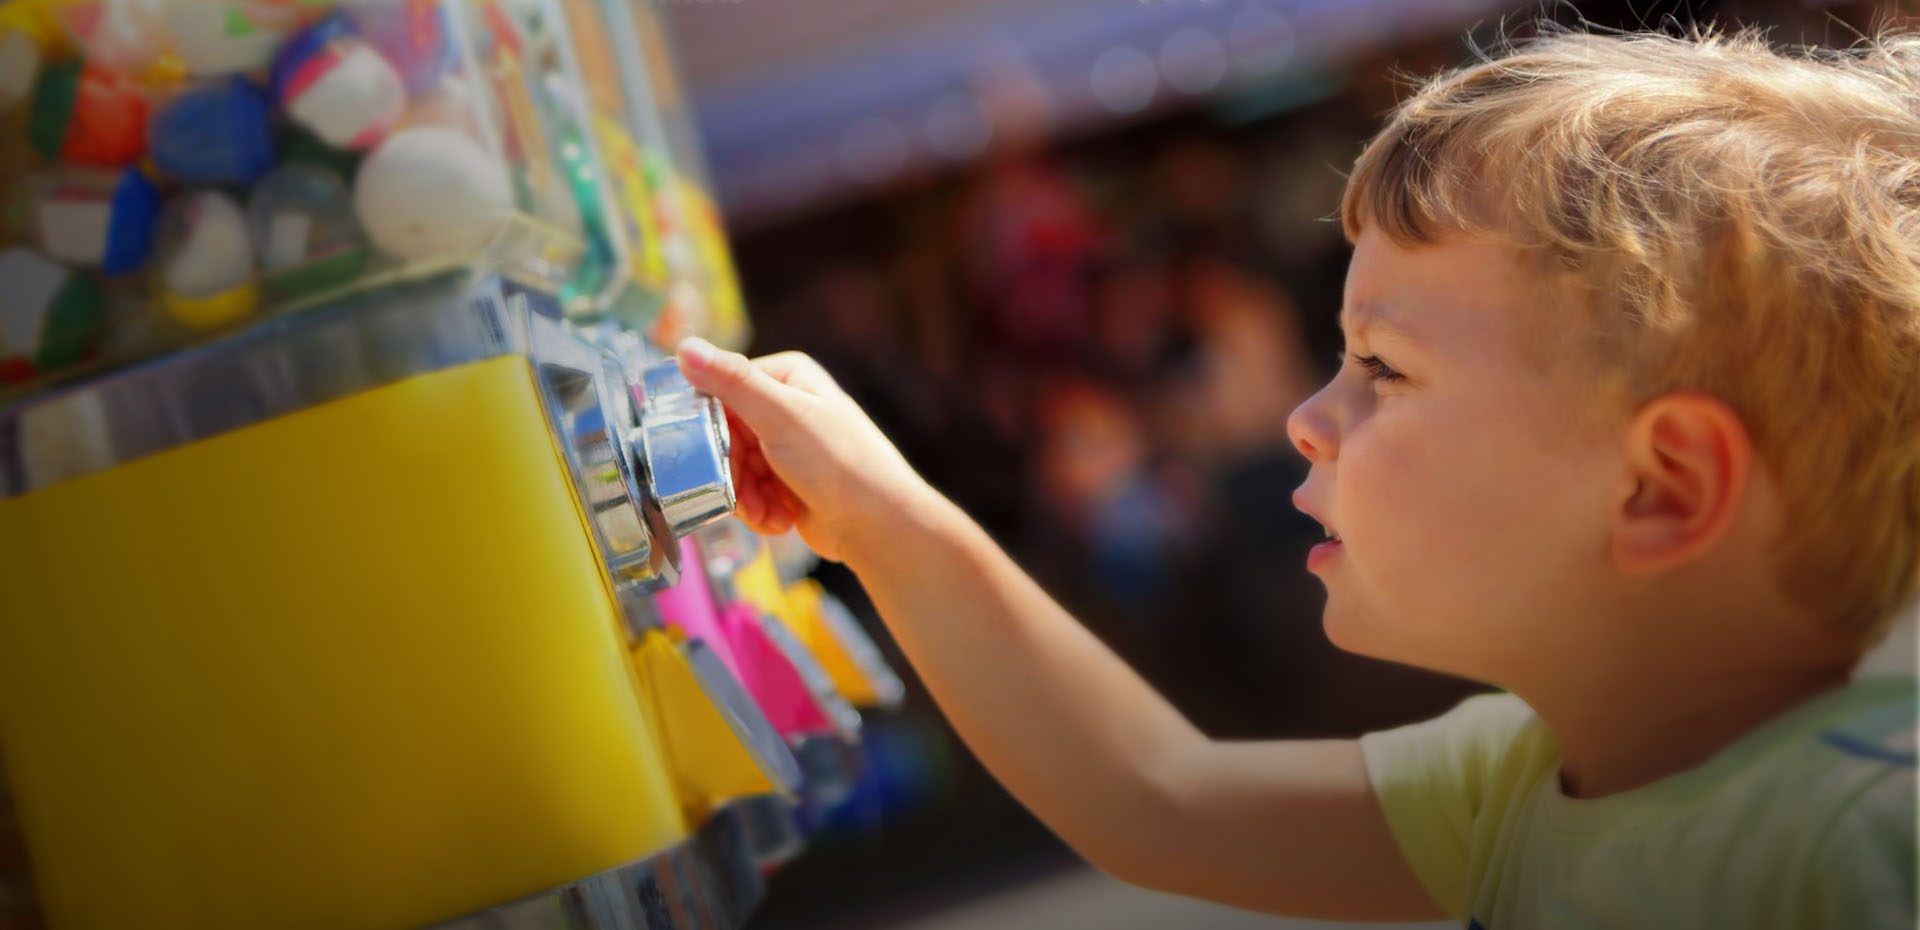 Installers Of Toys Vending Machines For Pubs